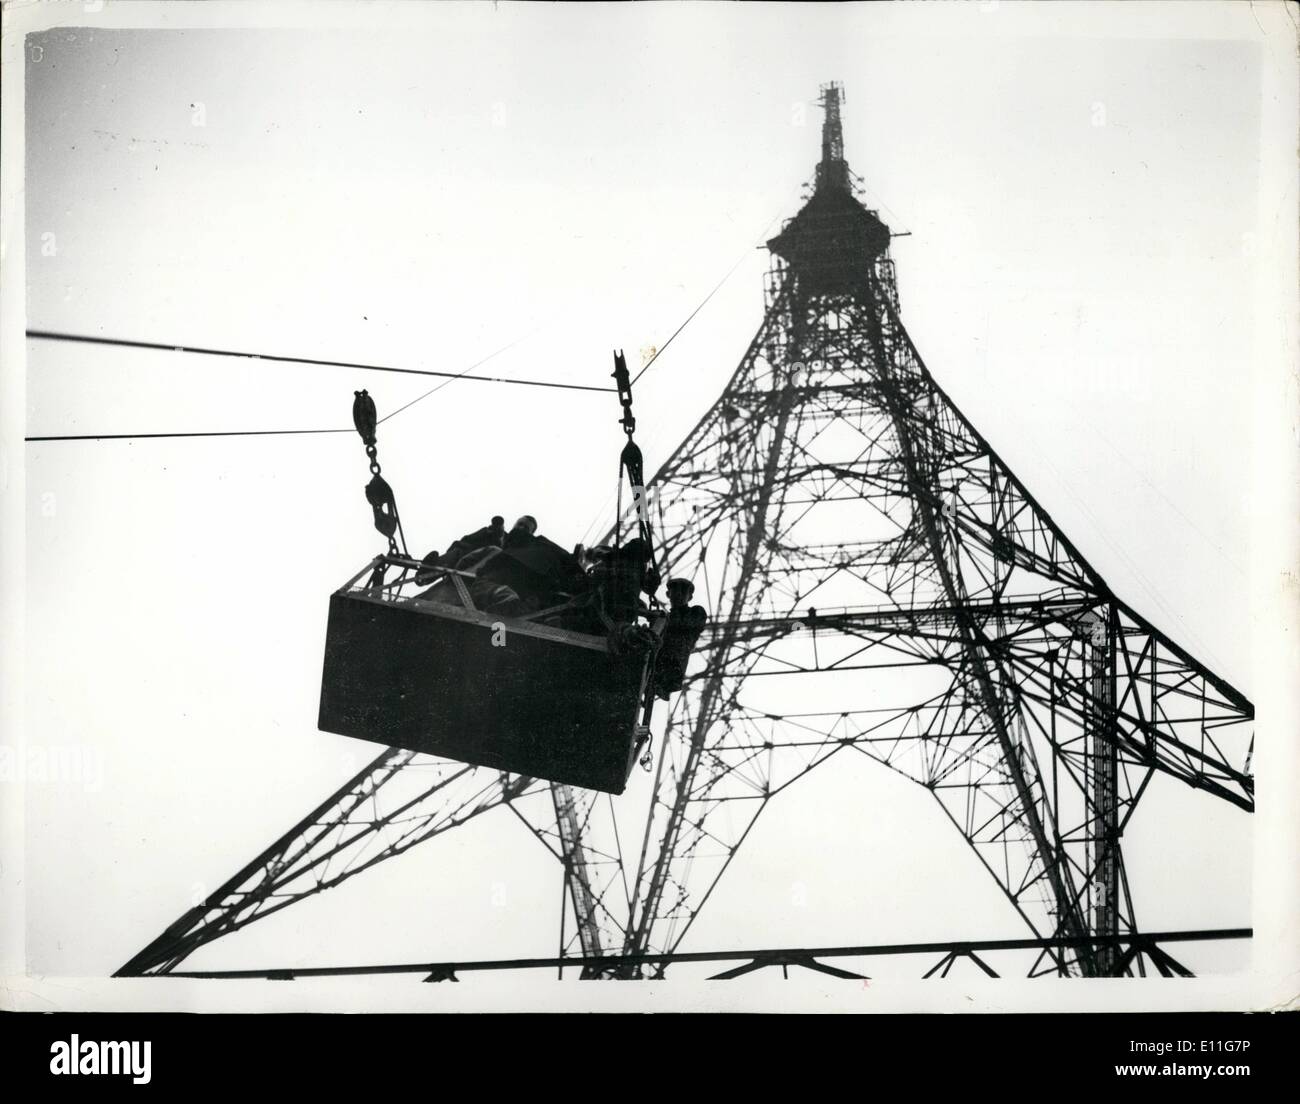 Nov. 11, 1977 - Testing the new B.B.C. Television mast with the aid of rockets - at Crystal palace: The new B.B.C. Television Mast - which is 700ft. high - underwent an aerodynamic test today - when a battery of ten rockets mounted on the tower at a height of 625ft. above ground level - and fire din sequence.. The rockets were a fixture - and when fired - each one created a thrust of half a ton.. Any movement of the tower being recorded on electron equipment in a mobile laboratory Stock Photo